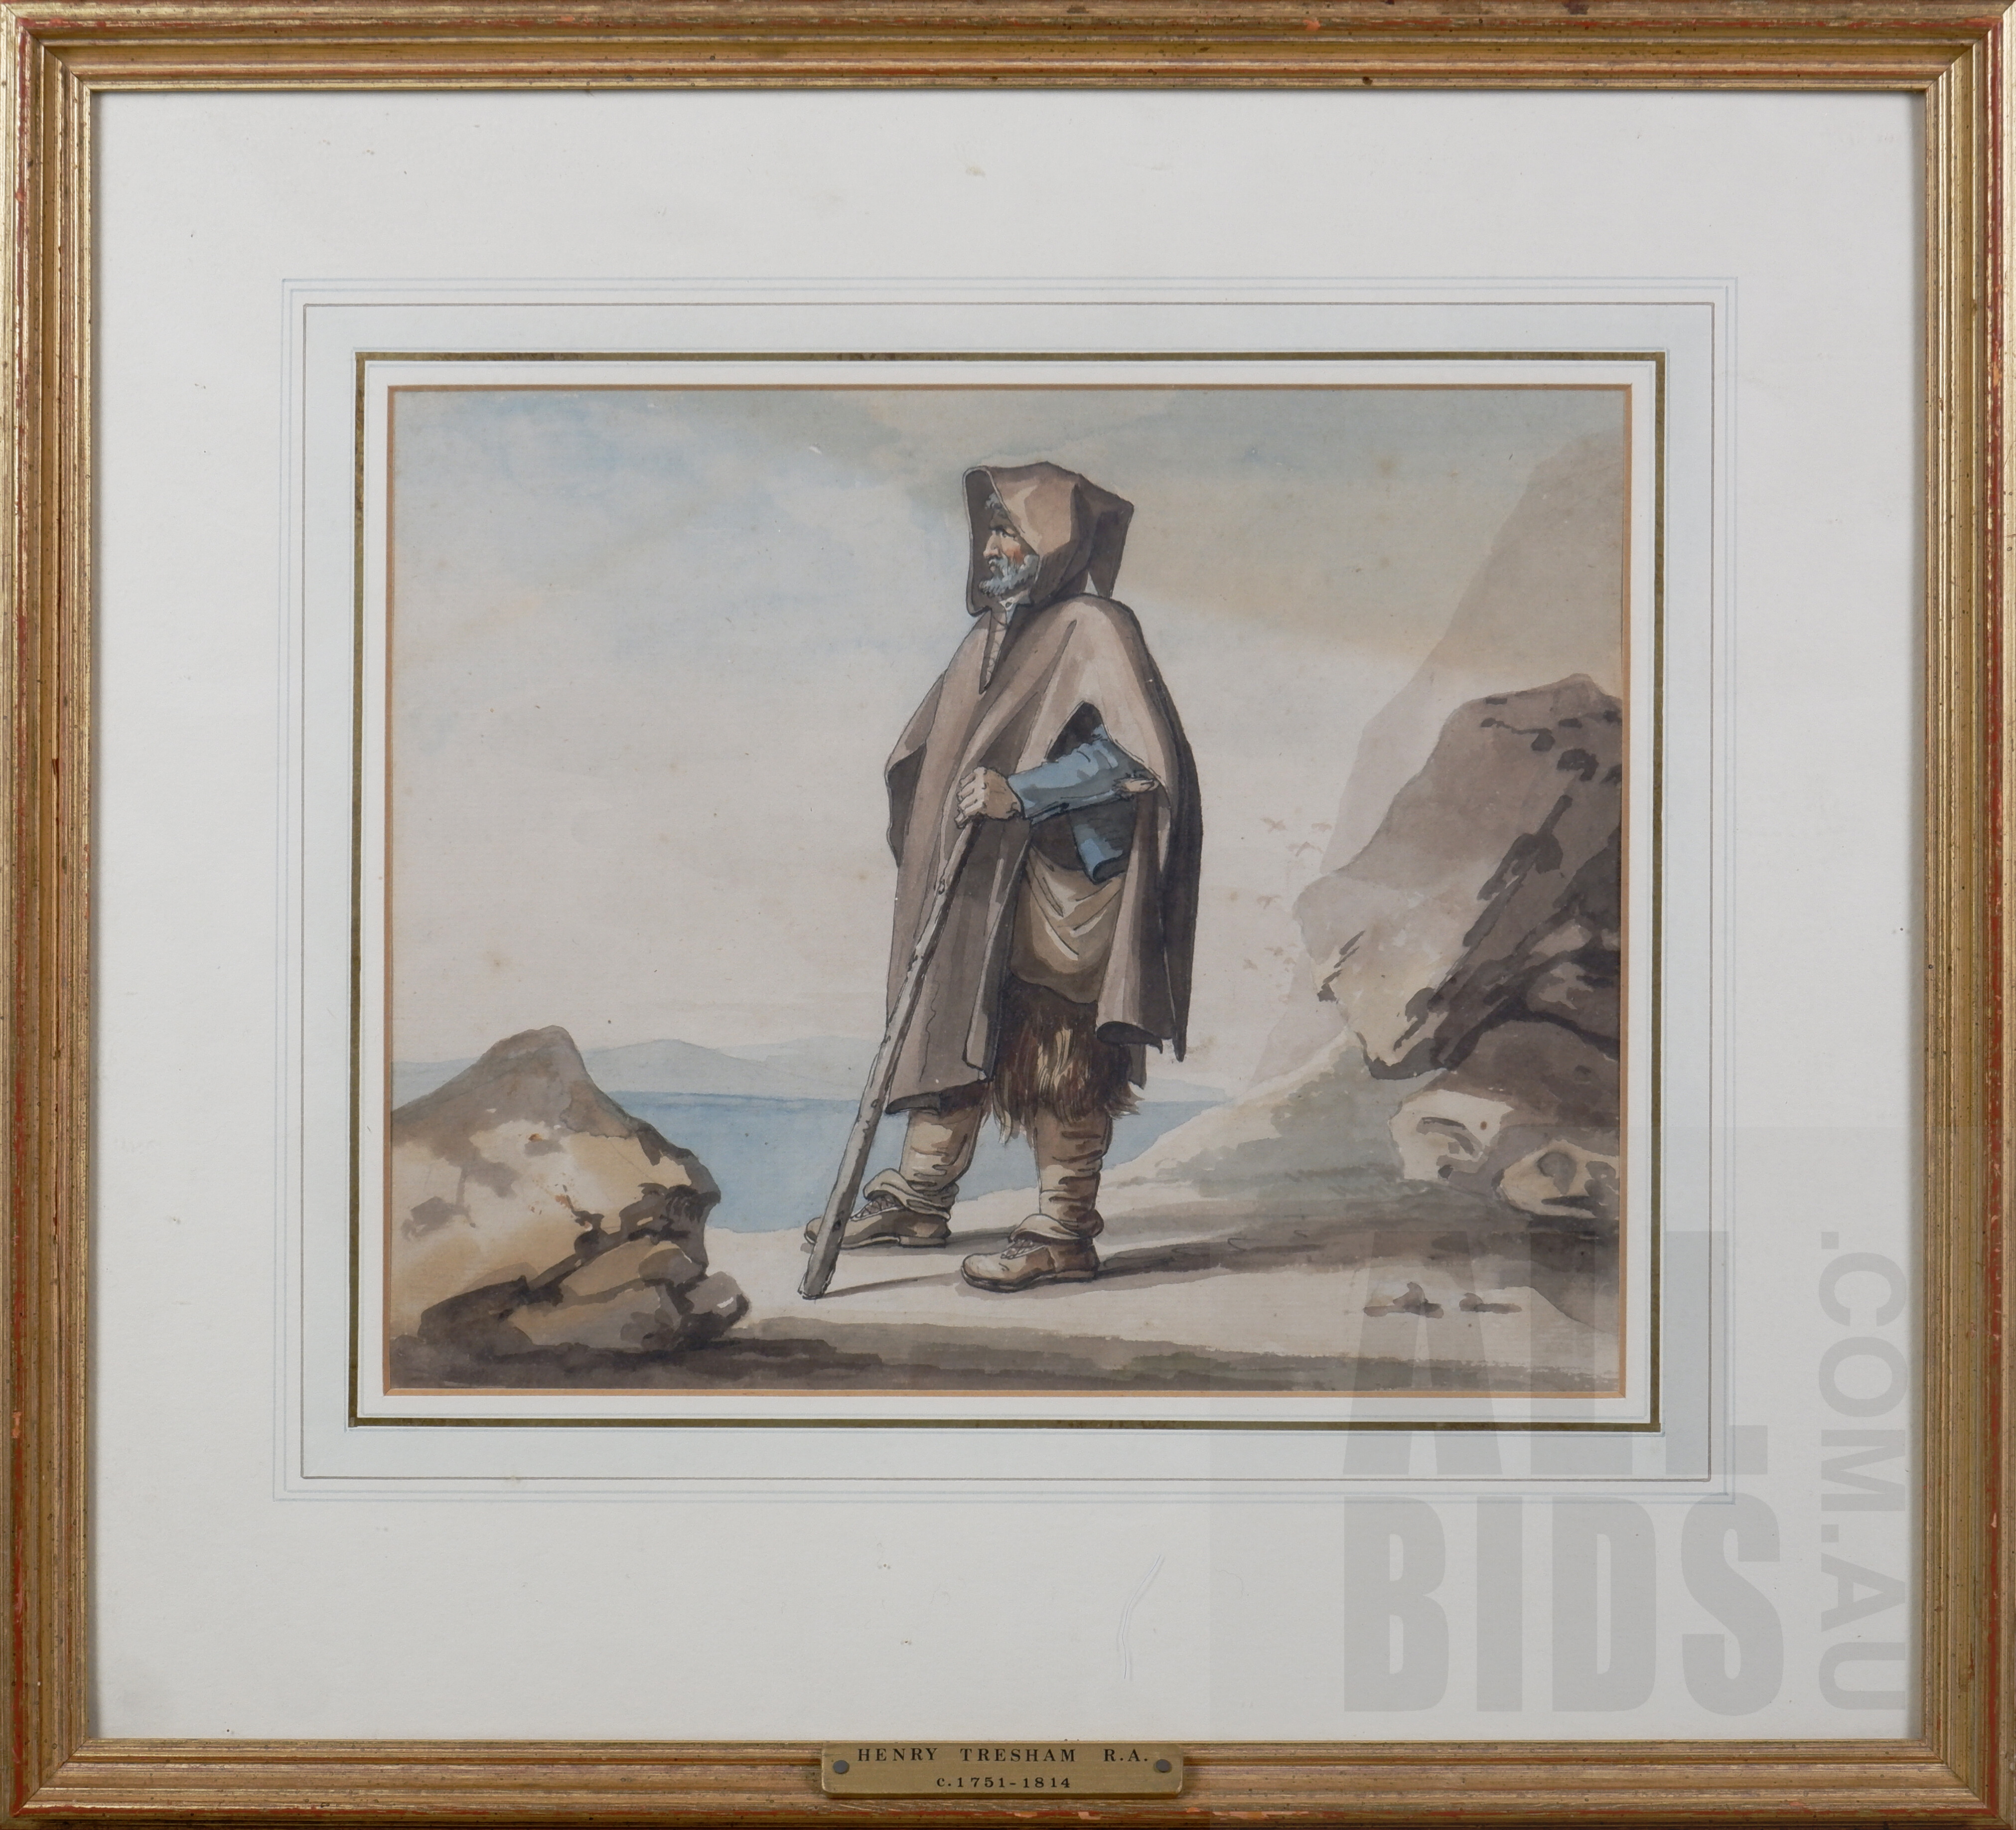 'Henry Tresham (1750/51-1814), A Peasant of Mount Erix, Pen, Grey Ink and Watercolour, 24 x 29 cm'